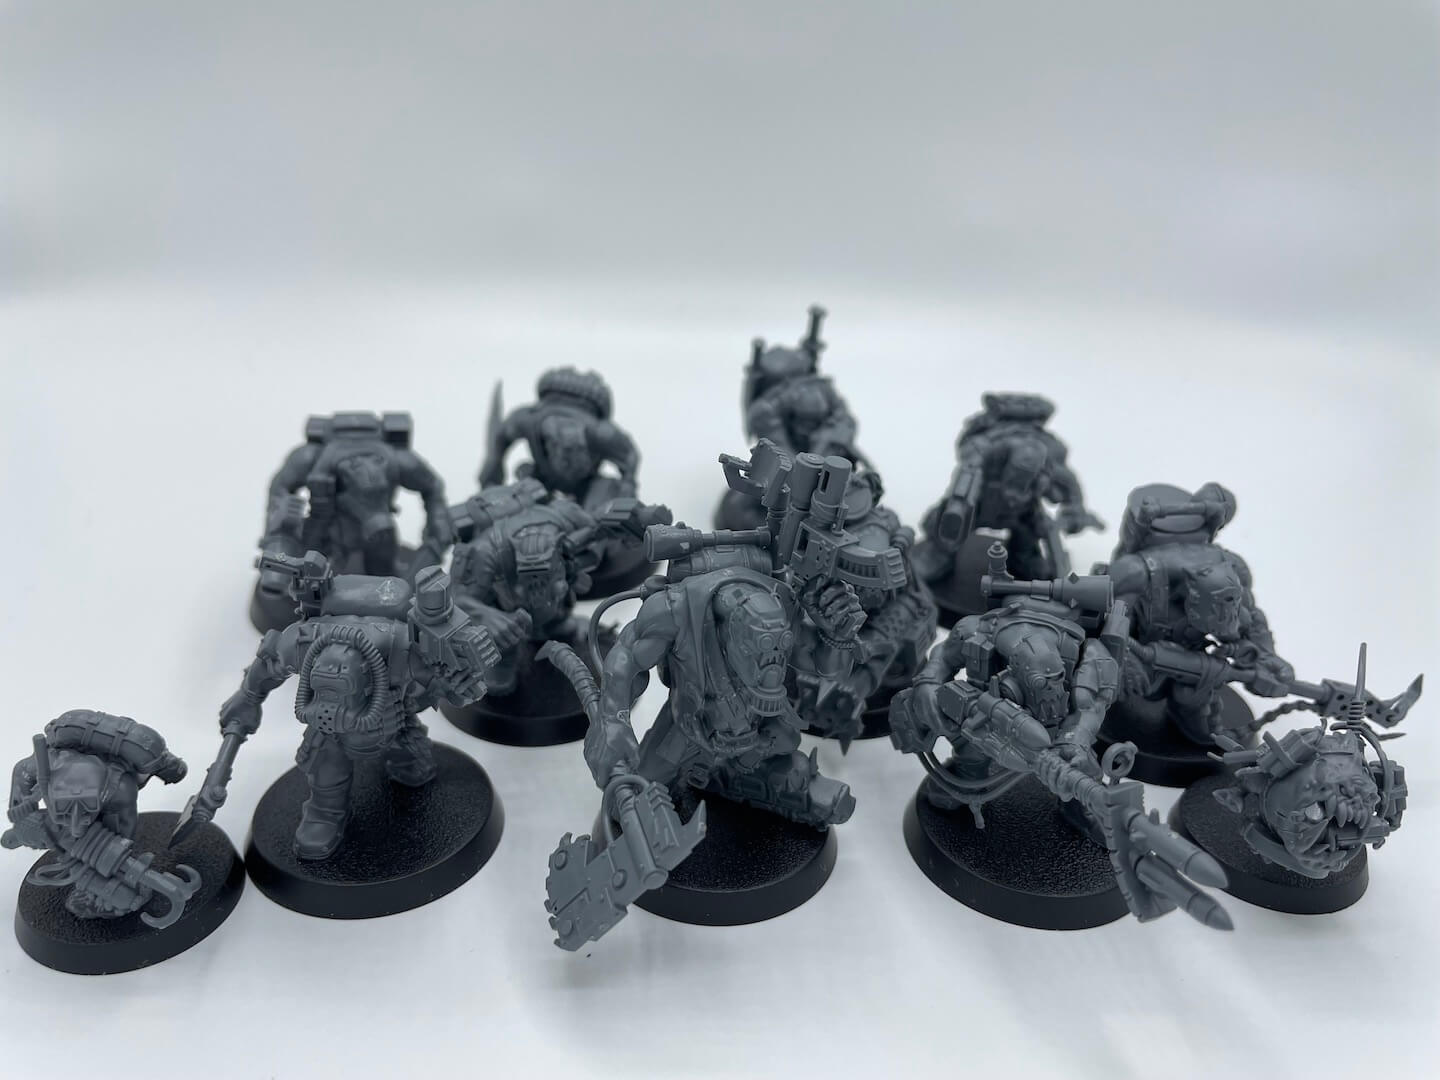 An image of the Warhammer 40K Boarding Patrol Orks unit called the Kommandos, who are dressed in recon gear.